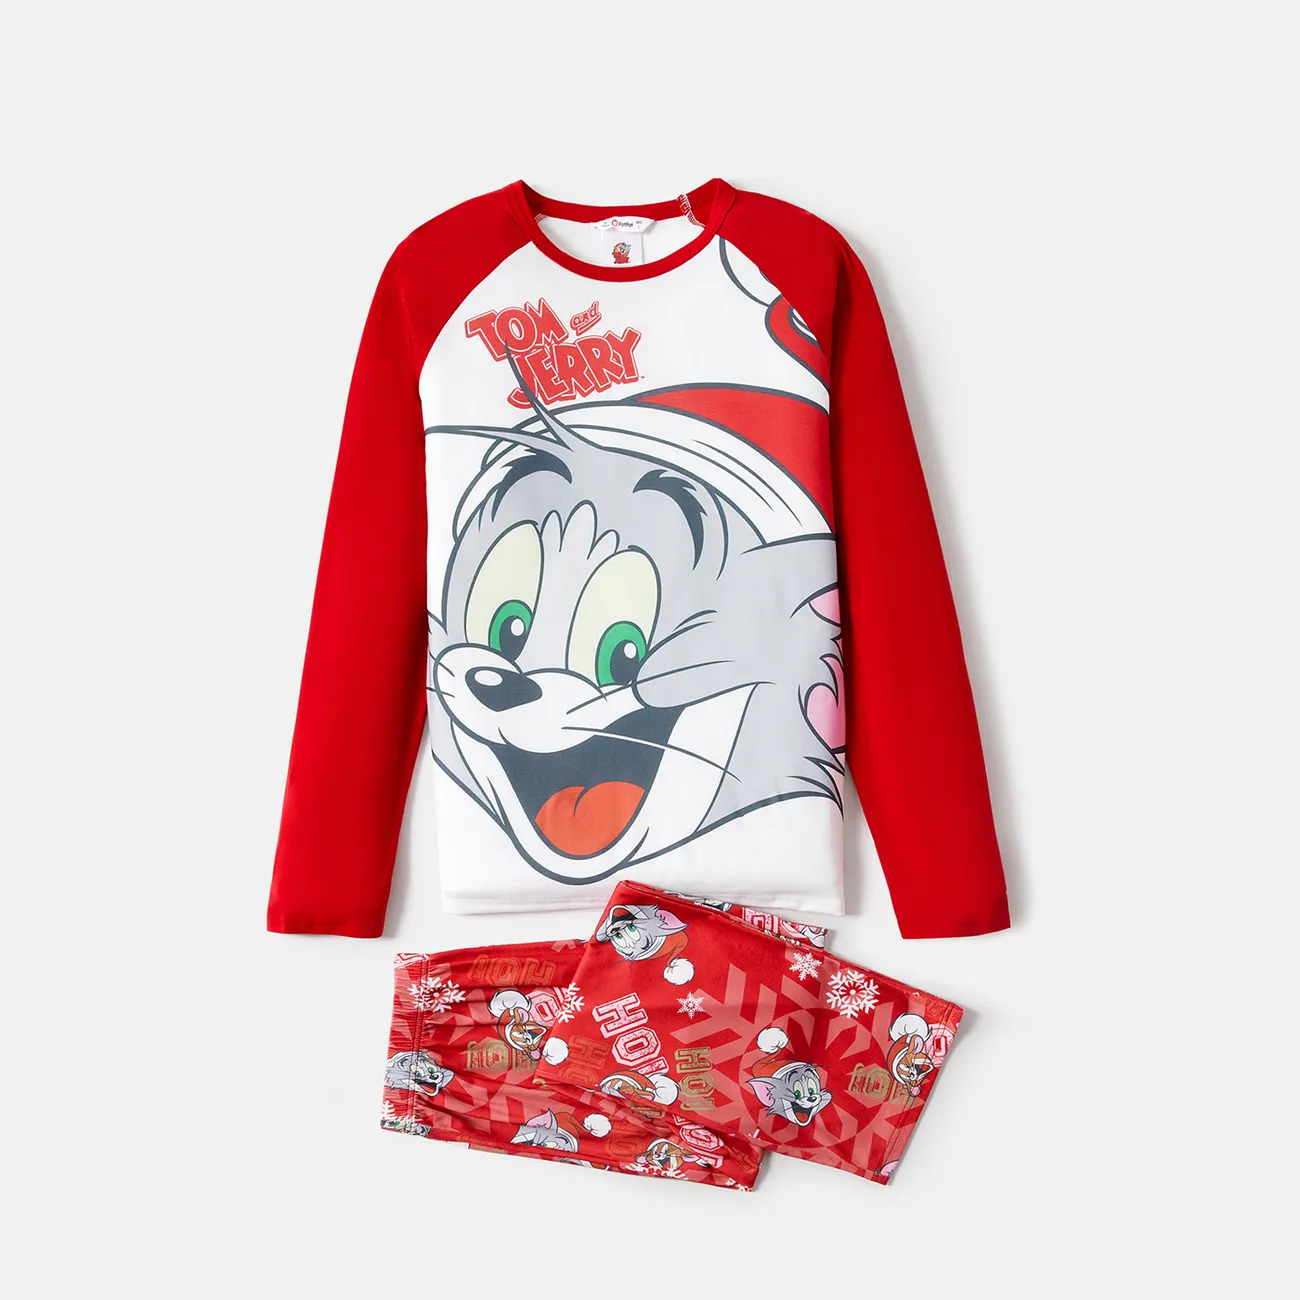 Tom and Jerry Family Matching Red Christmas Graphic Raglan-sleeve Pajamas Sets (Flame Resistant) Red big image 1